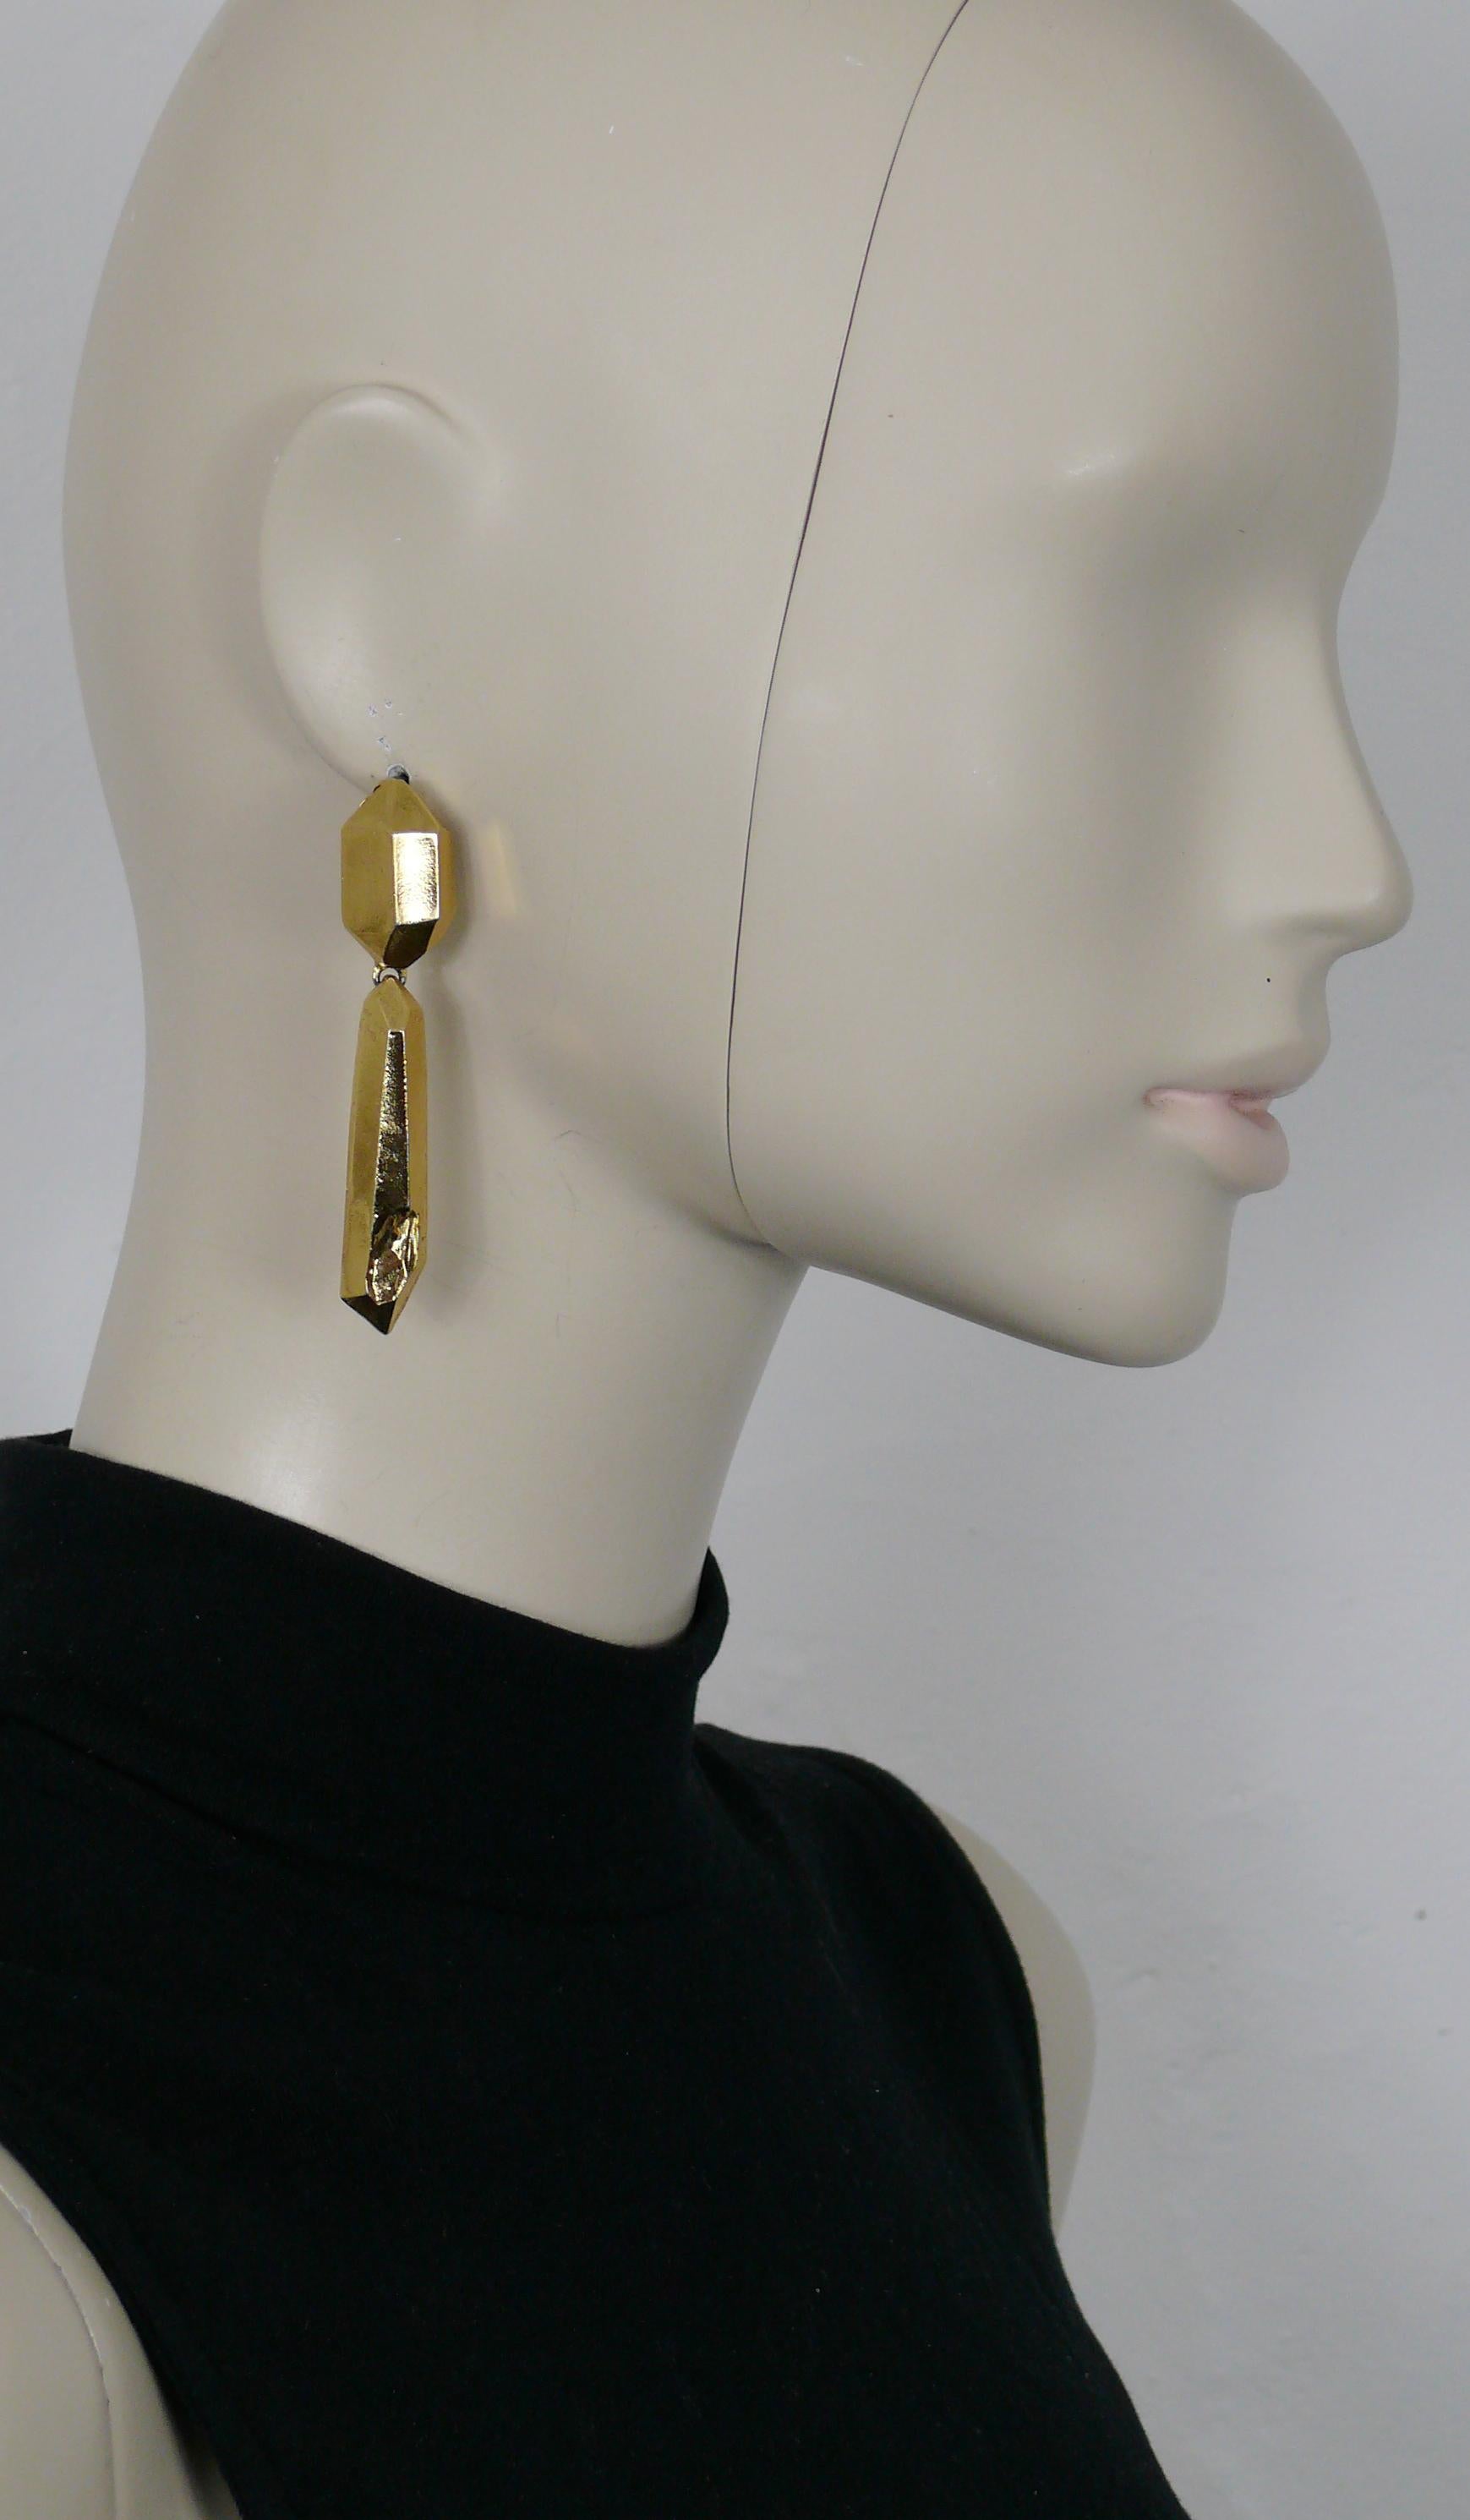 YVES SAINT LAURENT vintage gold toned dangling earrings (clip on) featuring quartz prism design.

Embossed YSL.

Indicative measurements : max. height approx. 7 cm (2.76 inches) / max. width approx. 1.4 cm (0.55 inch).

NOTES
- This is a preloved